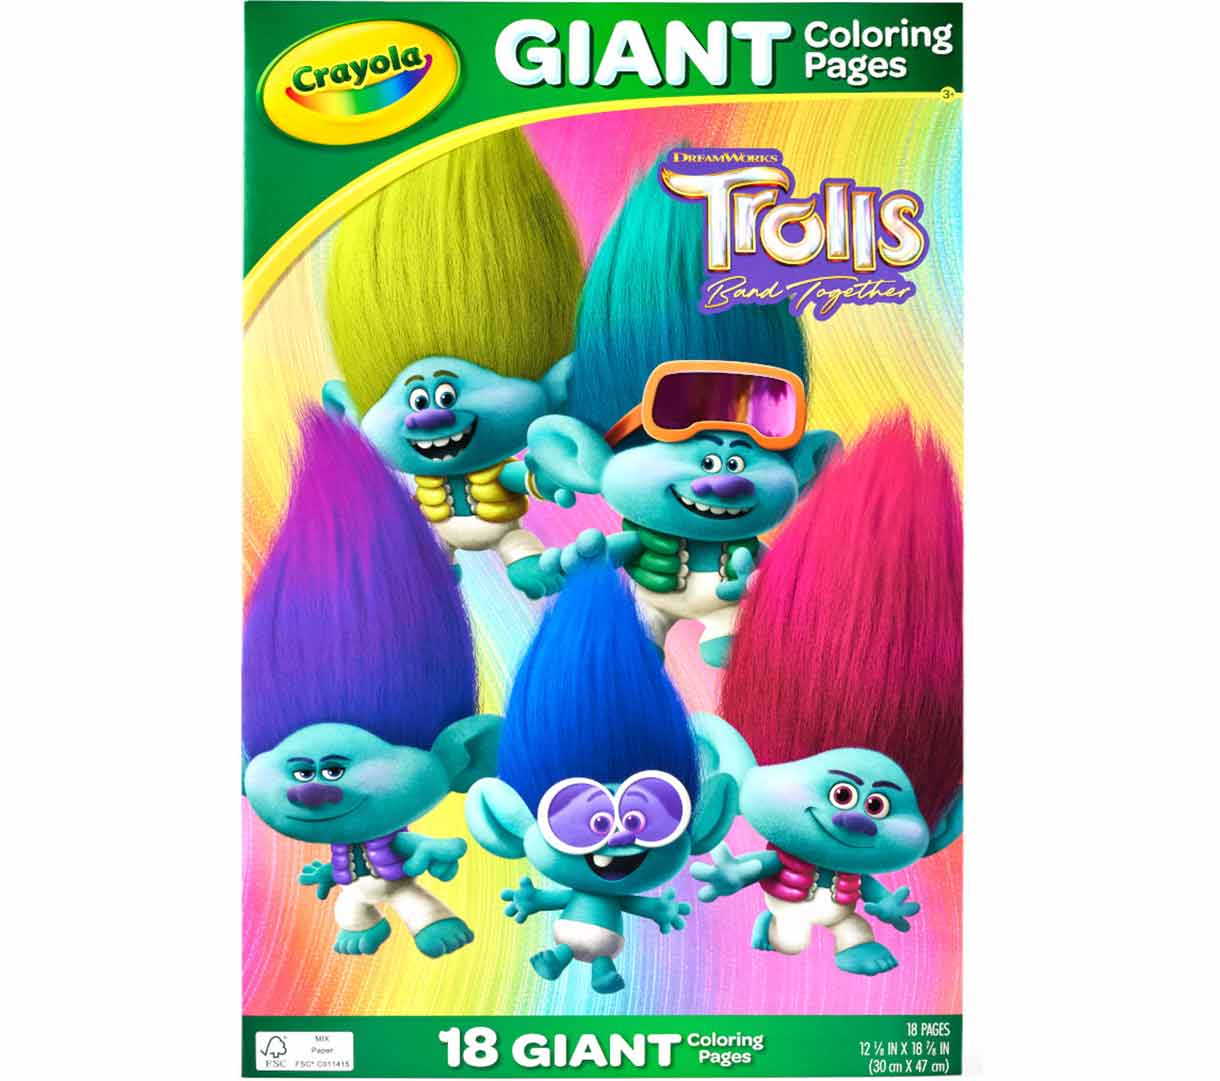 Trollls 3 Giant Coloring Pages - 18 Pages | Crayola.com | Crayola